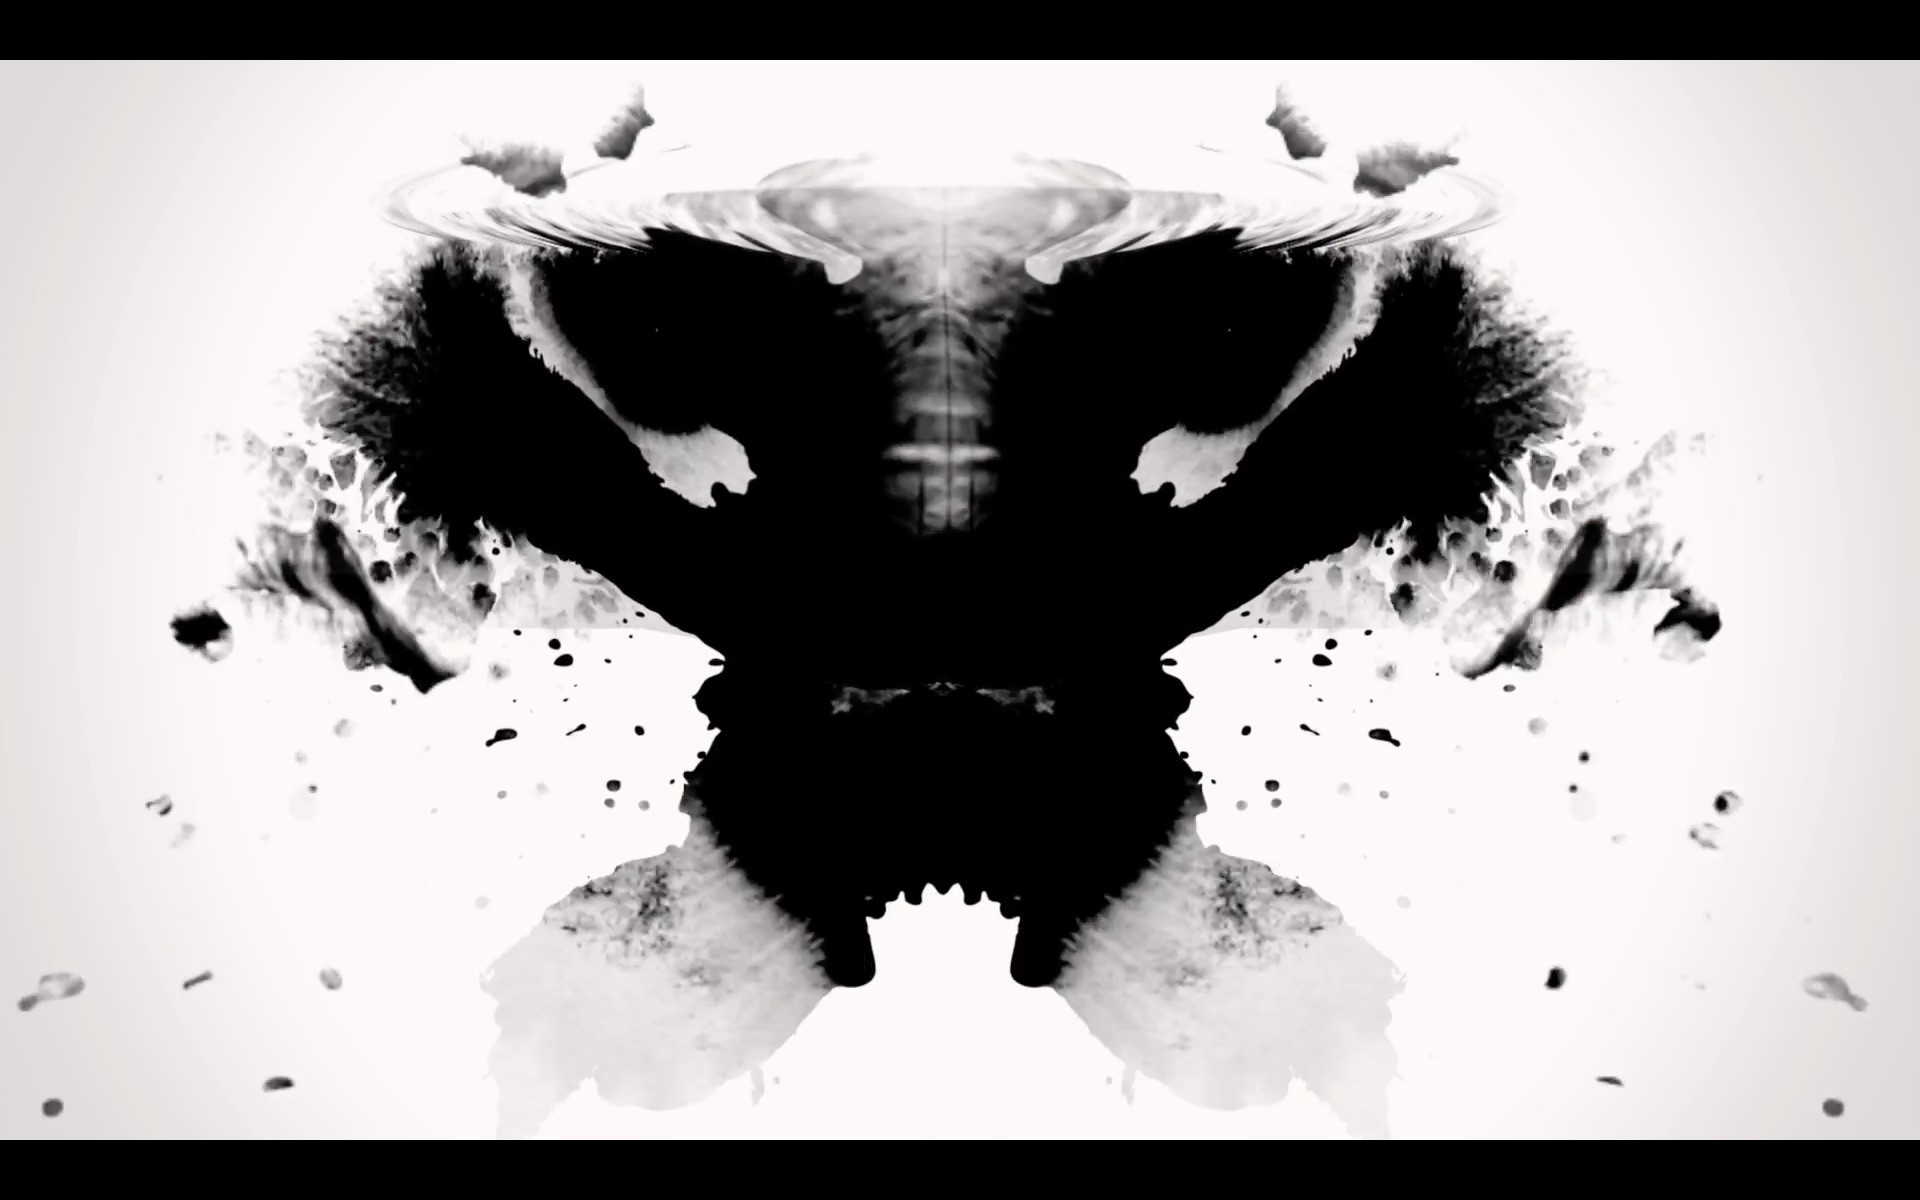 1920x1200 Hillary Clinton Campaign Features Rorschach Test Ink Blots and Donald Trump  Words on Immigration | ResourcesForLife.com